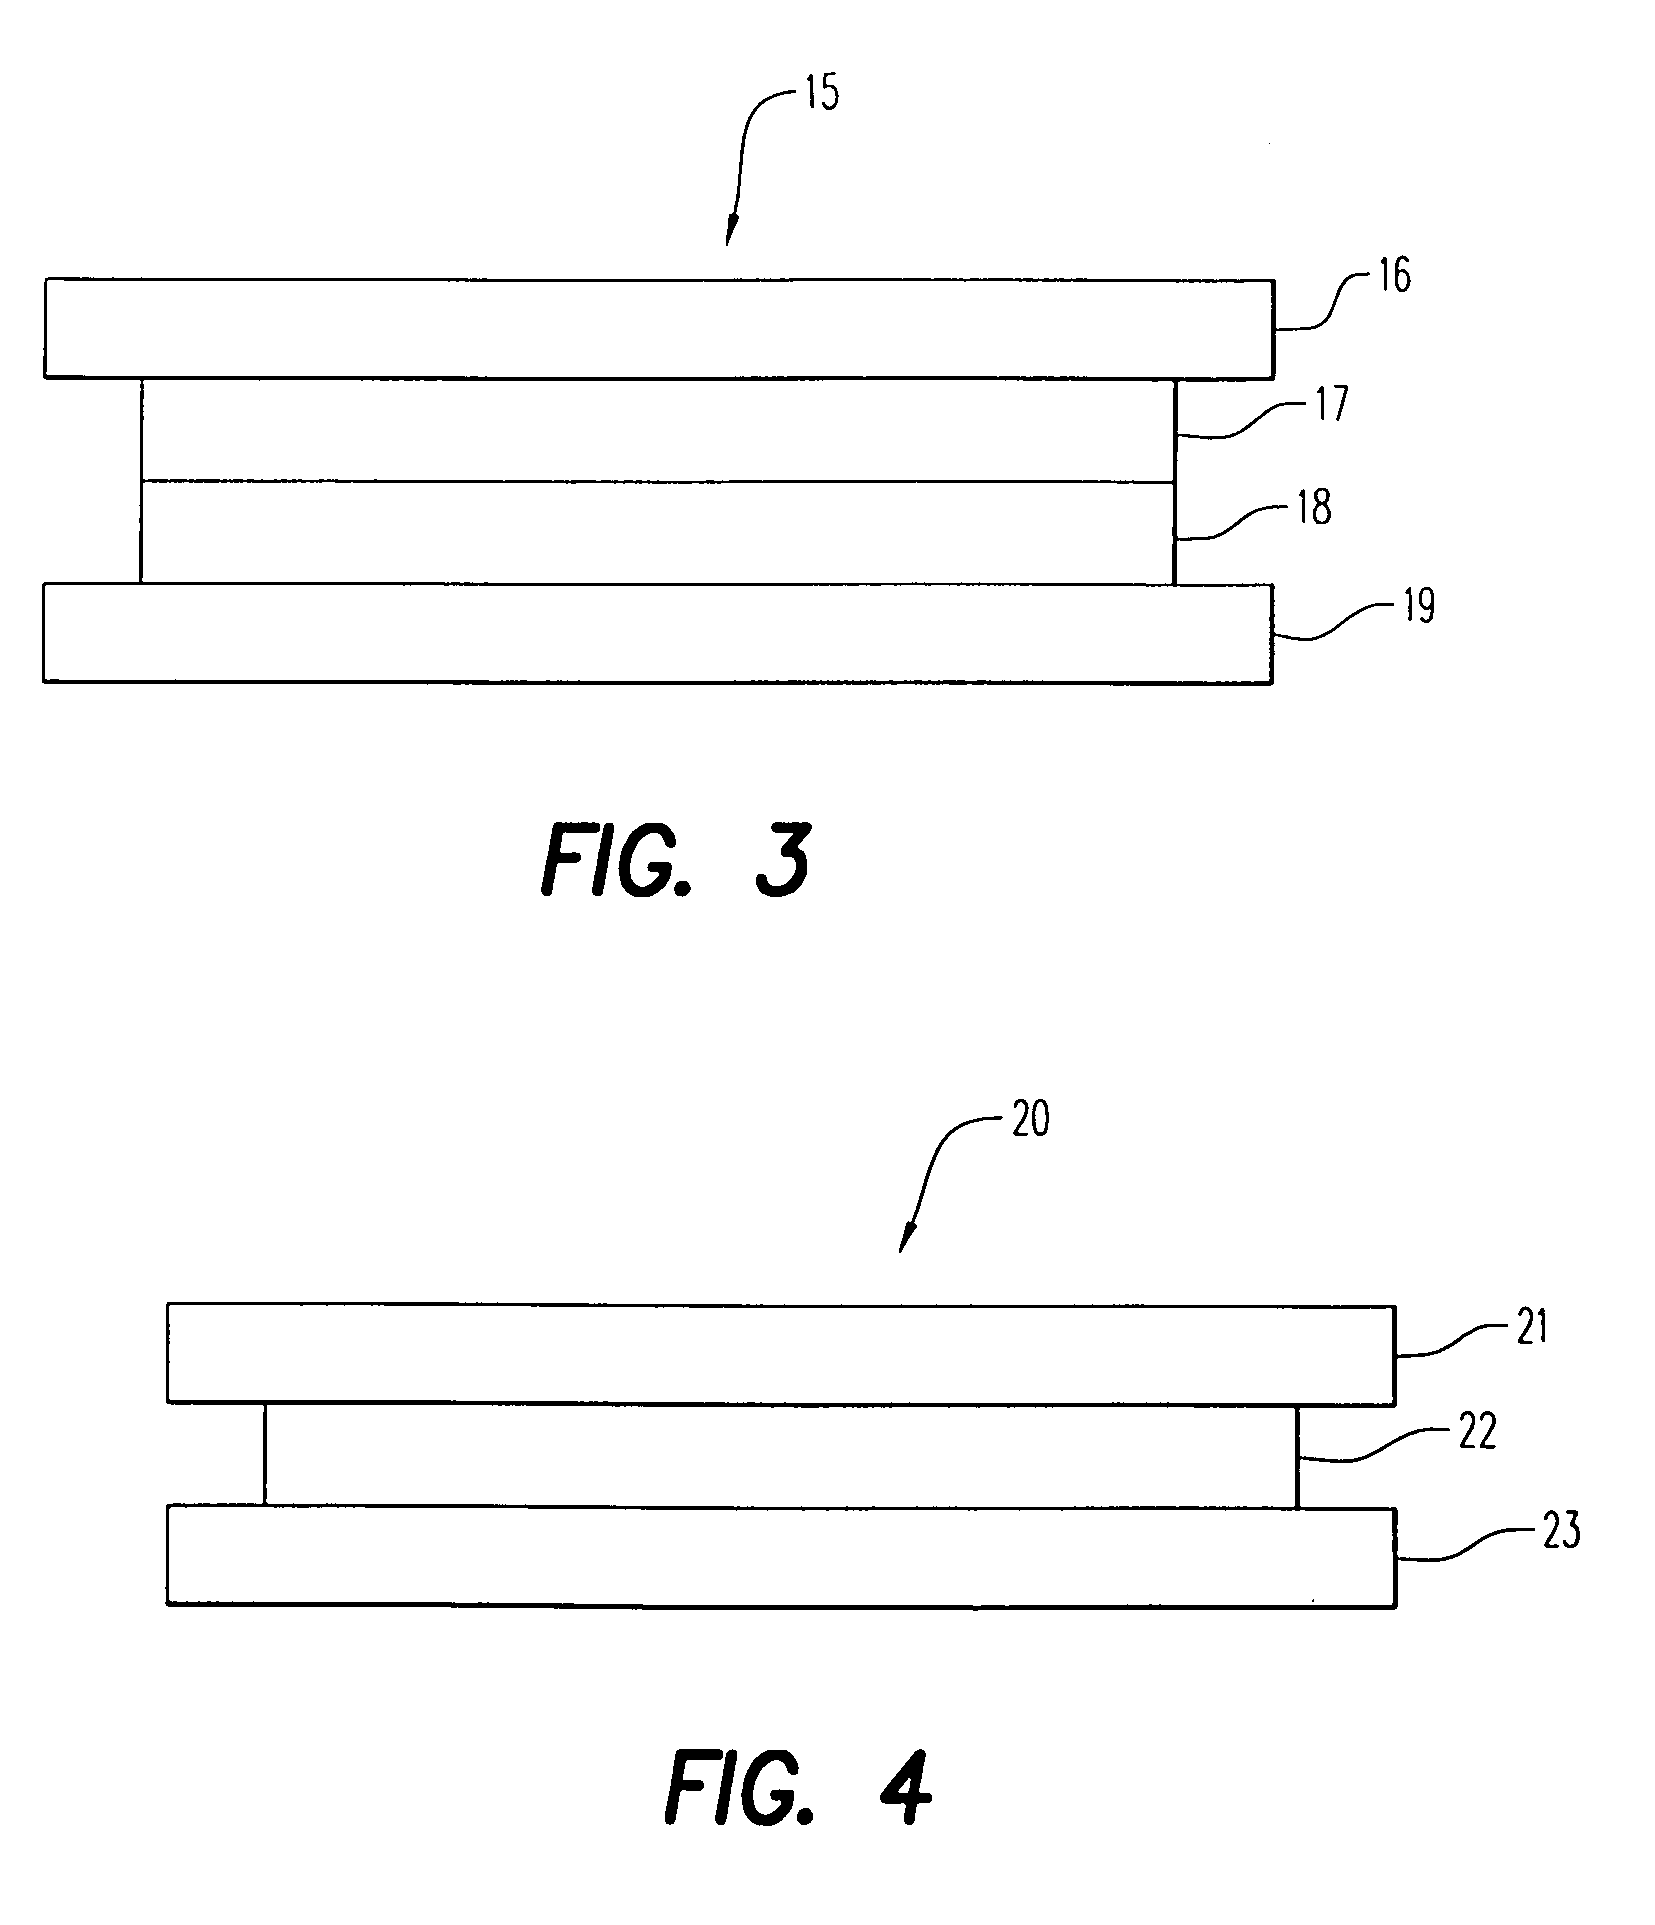 Proton or ion movement assisted molecular devices